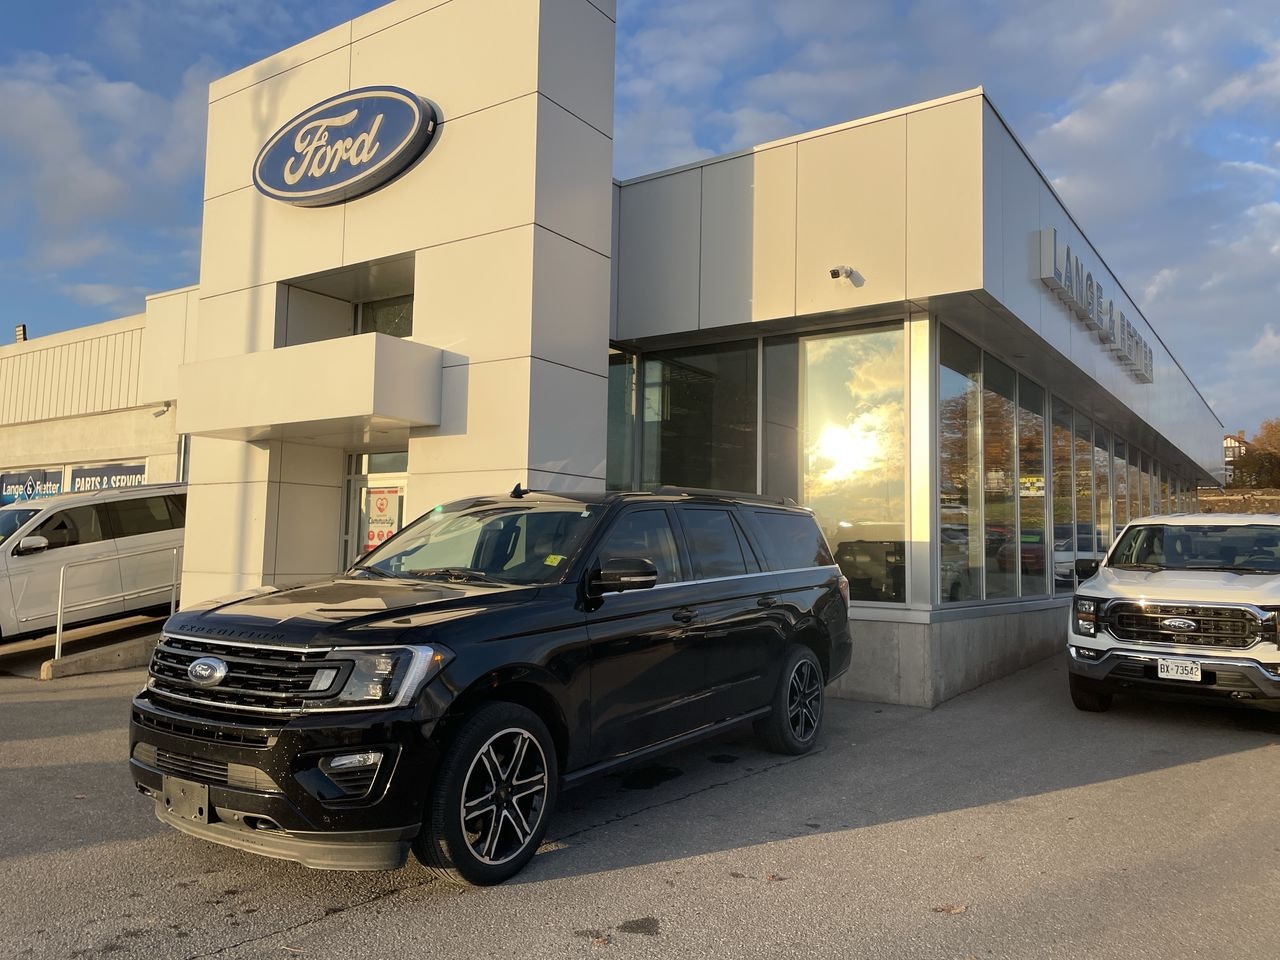 2021 Ford Expedition - 21452B Full Image 1